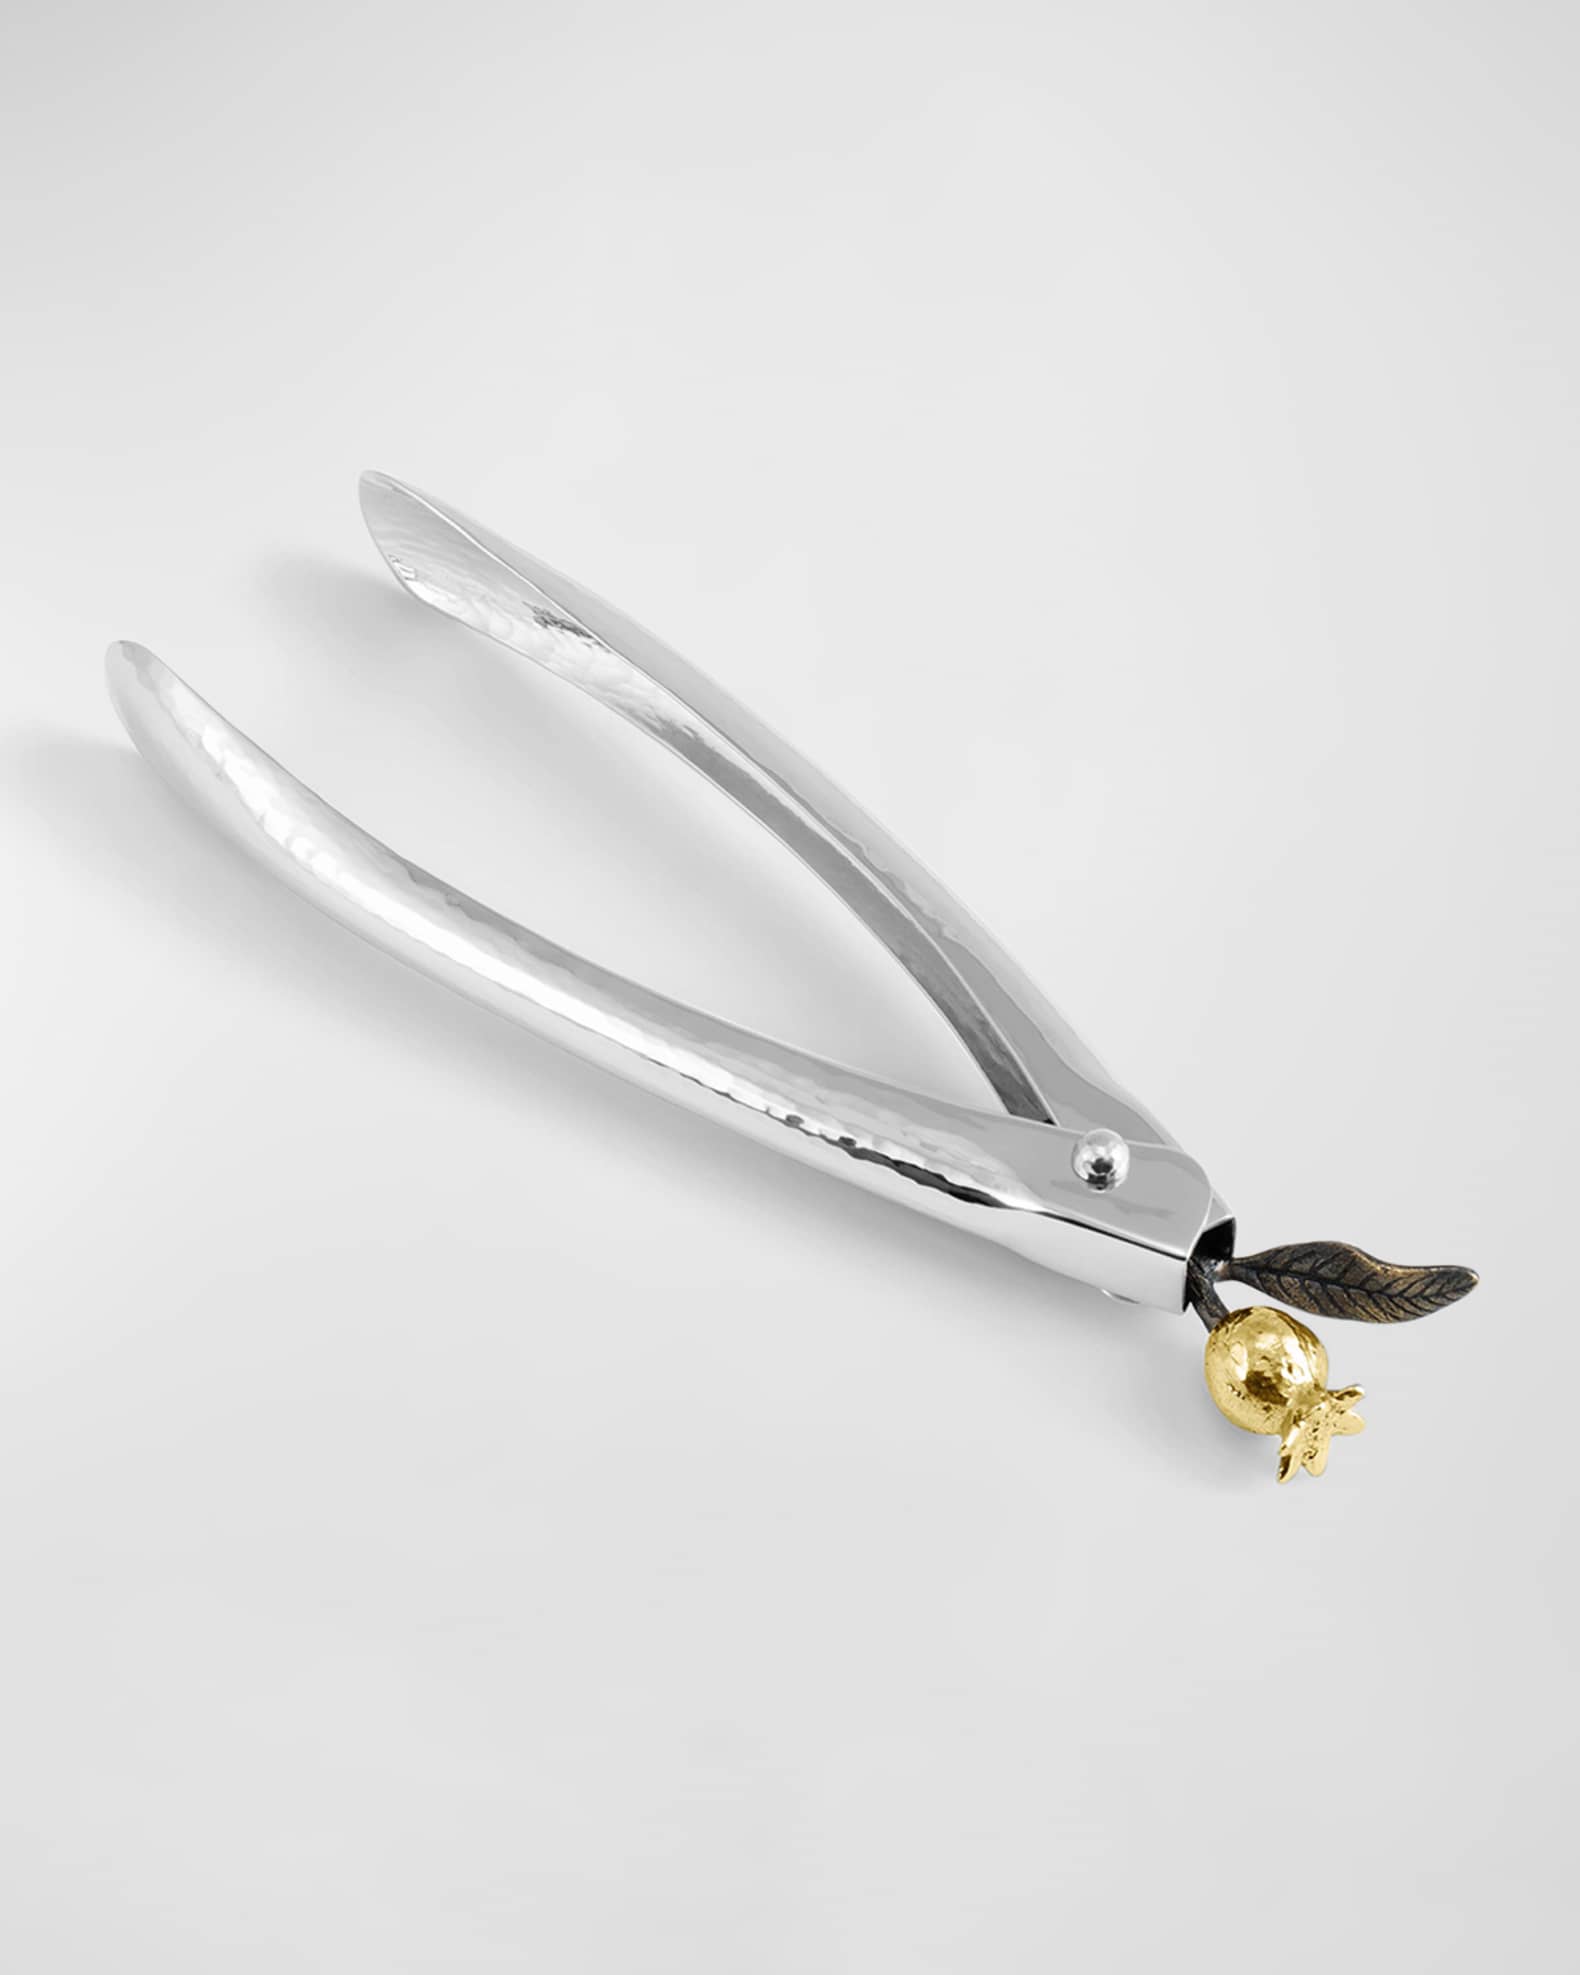 All-Clad Precision Stainless-Steel Locking Kitchen Tongs